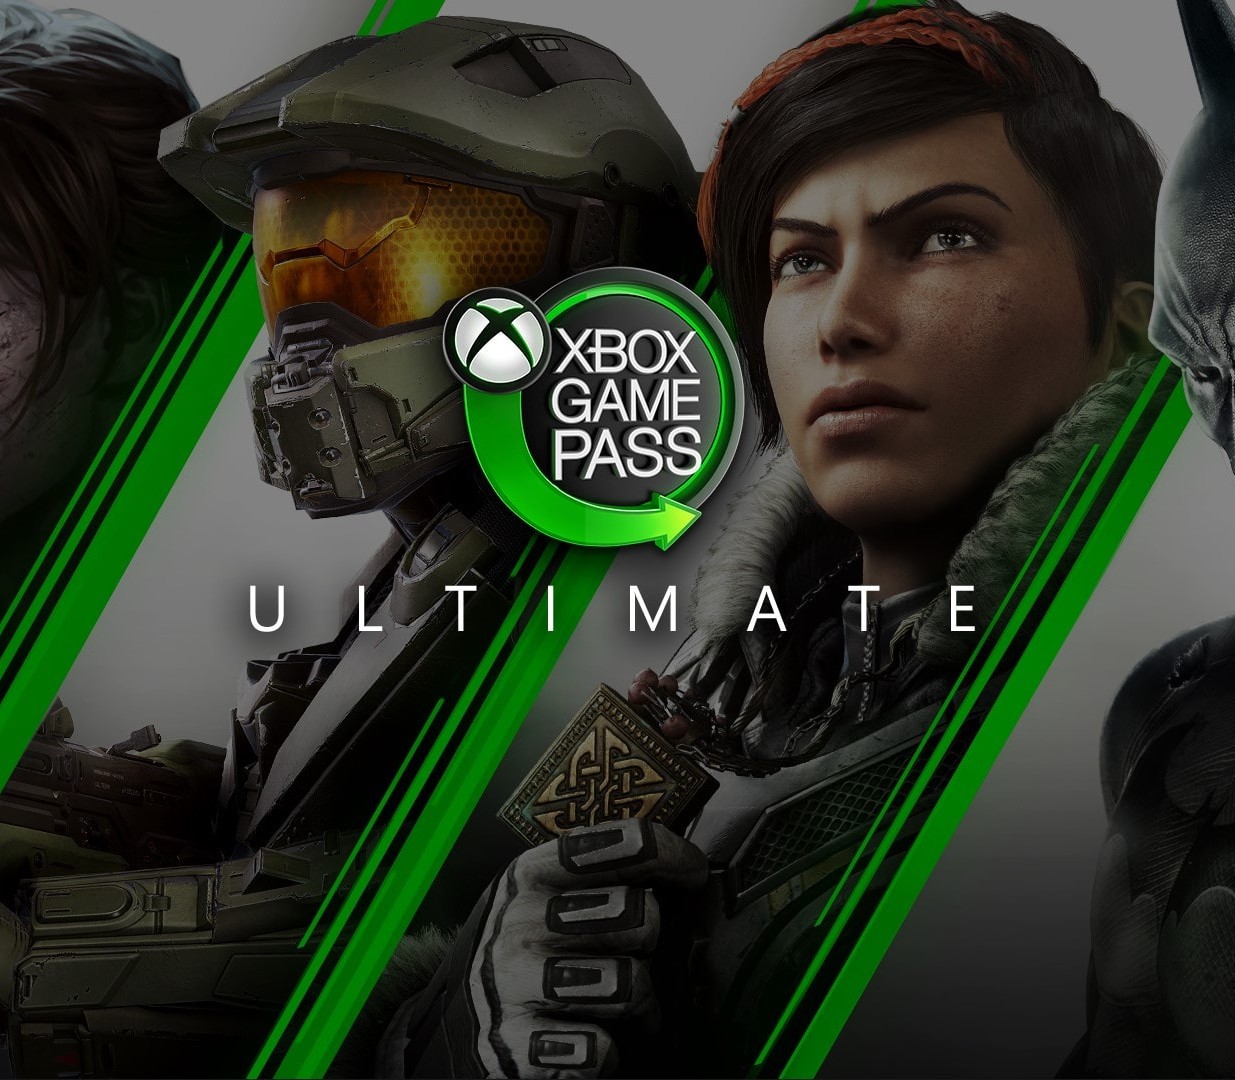 presidente ajo flota Xbox Game Pass Ultimate Trial - 14 days XBOX One / Series X|S / Windows 10  CD Key (ONLY FOR NEW ACCOUNTS) | Compra más barato en Kinguin